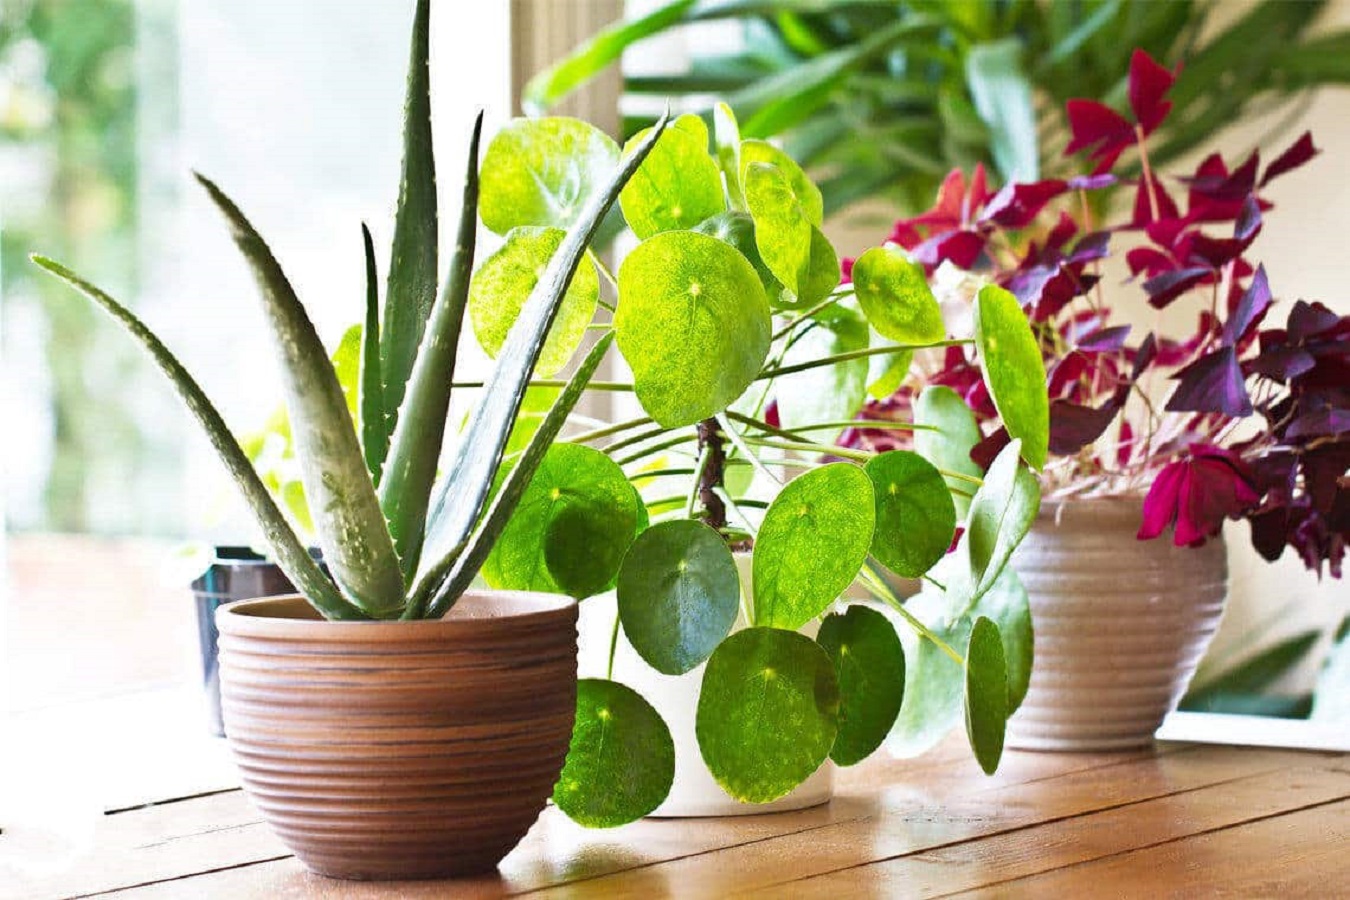 Windowsill Plants - Discover 4 Great Plants for Your Windowsill